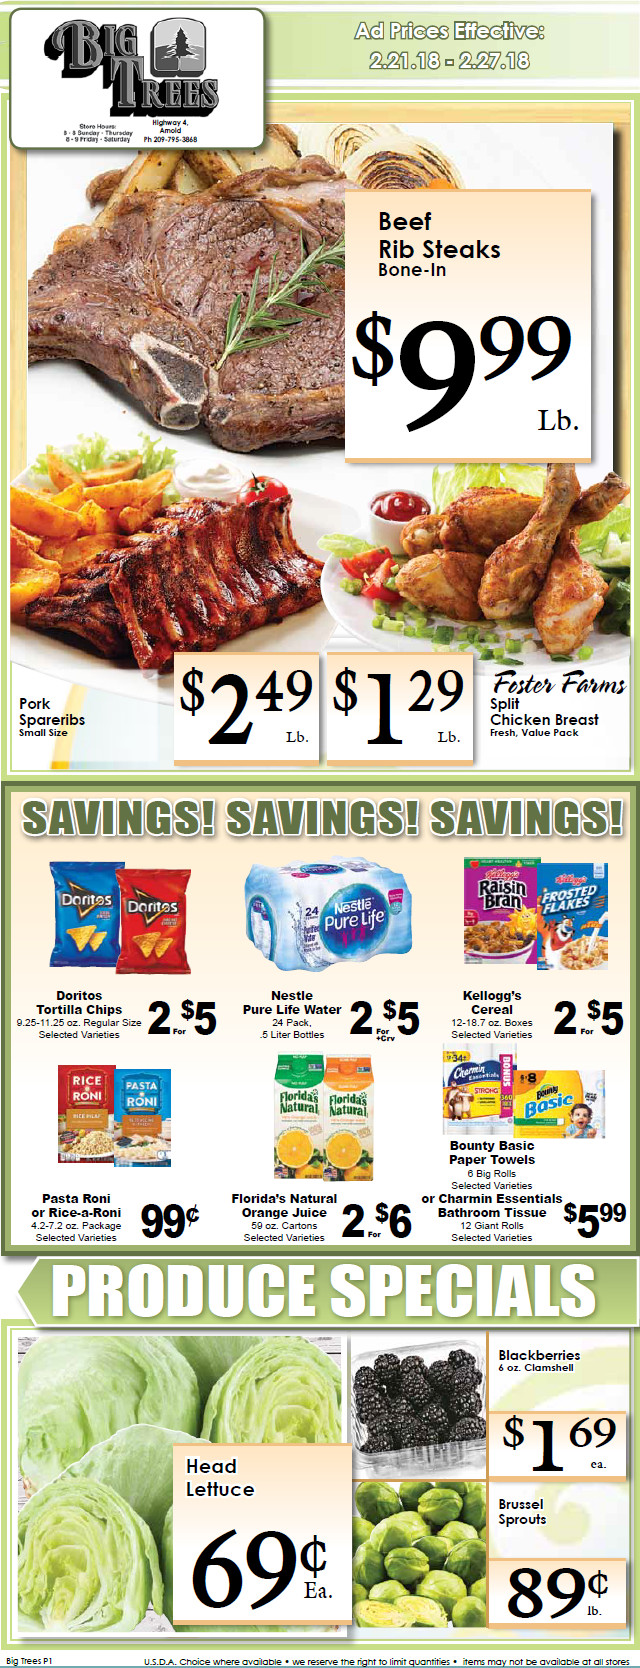 Big Trees Market Weekly Ad & Specials Through February 27th